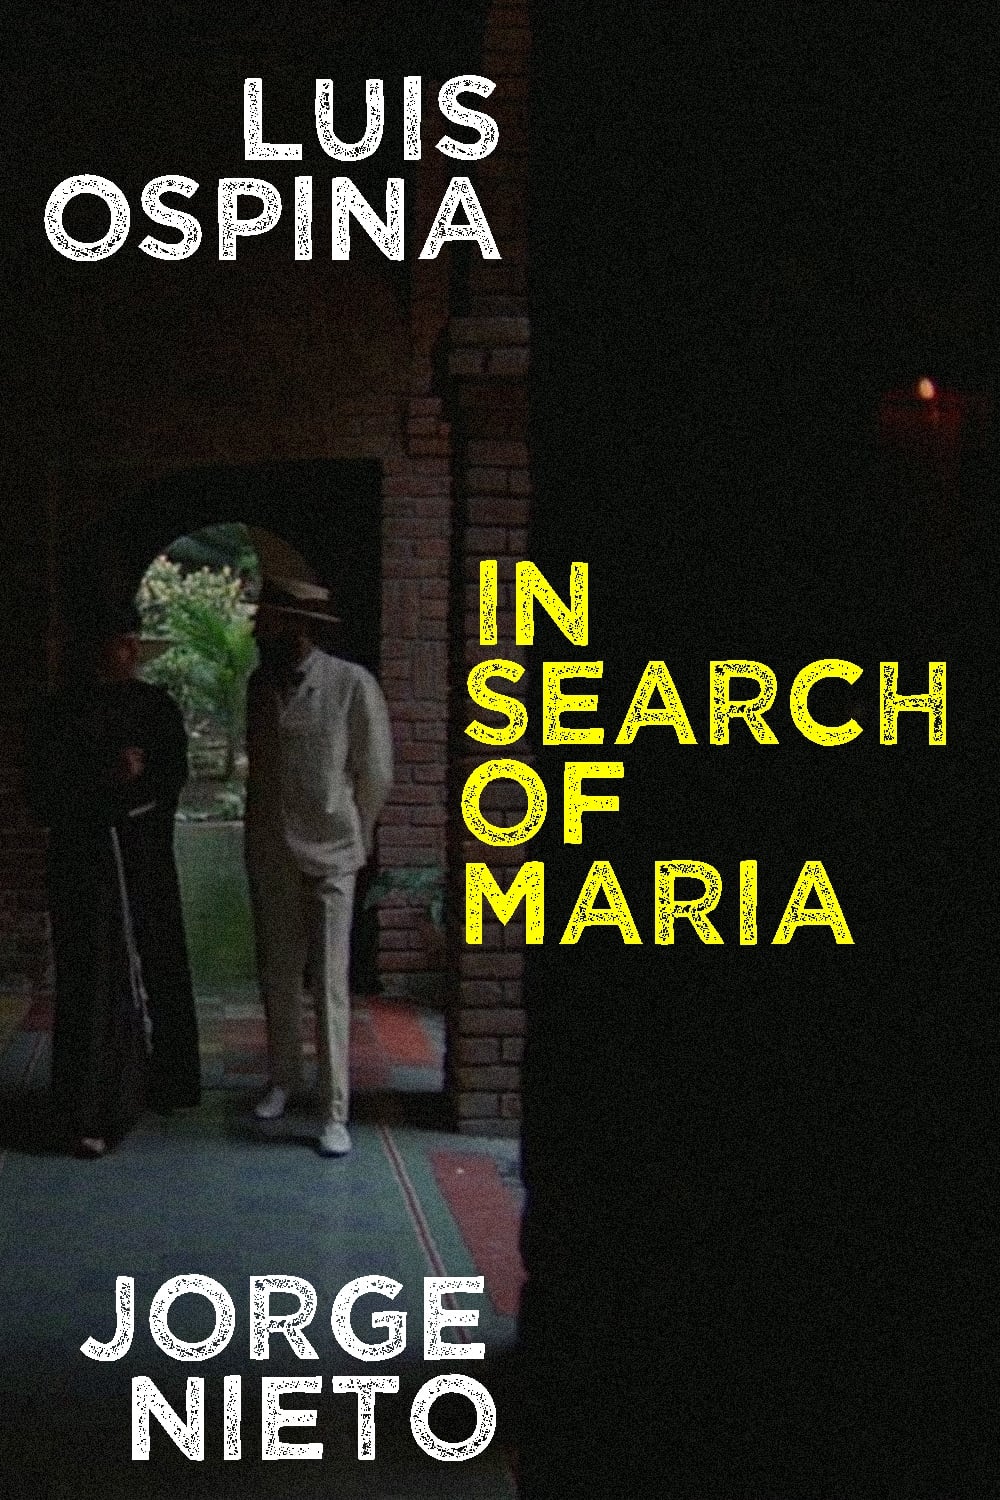 In Search of Maria